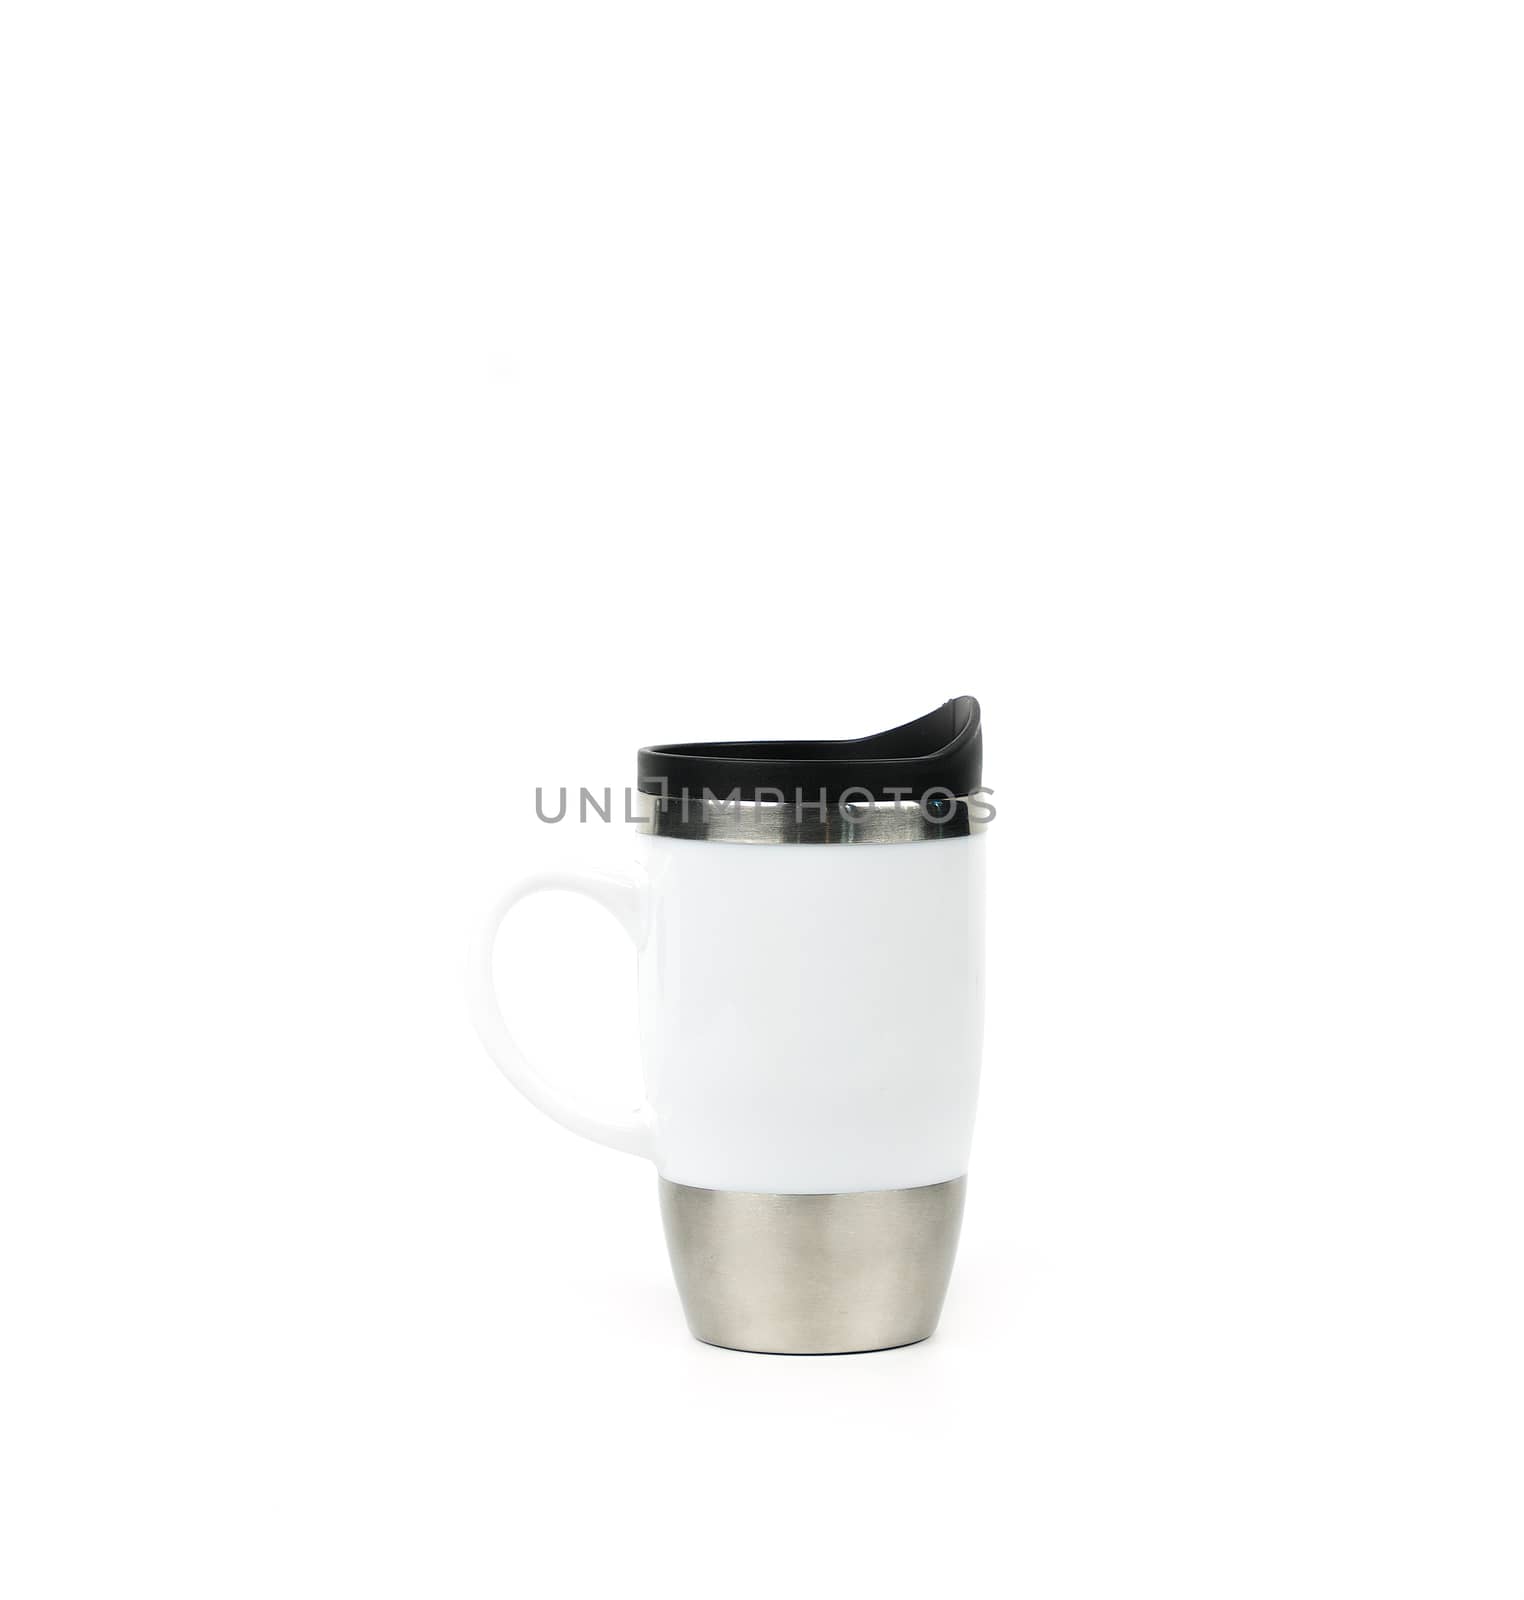 White thermos stainless steel ceramic glass with handle isolated on white background with copy space